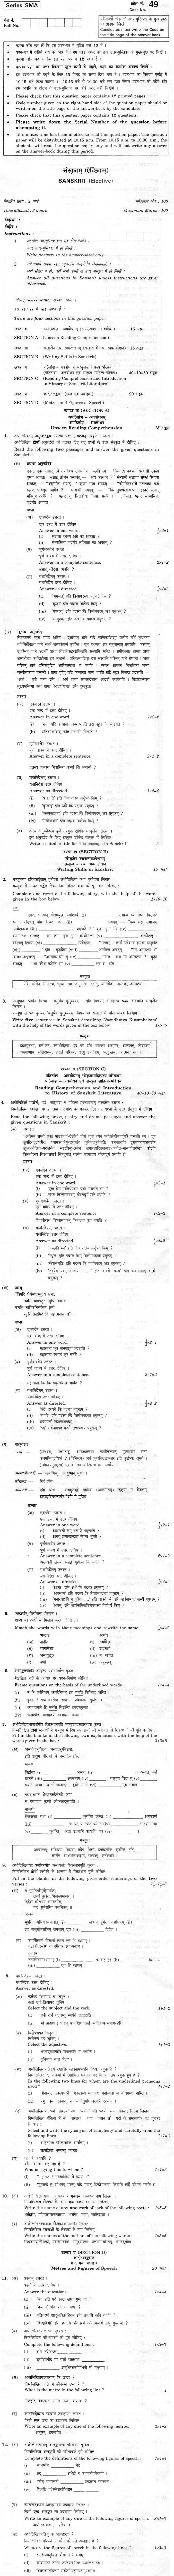 CBSE Class XII Previous Year Question Paper 2012 Sanskrit (Elective)